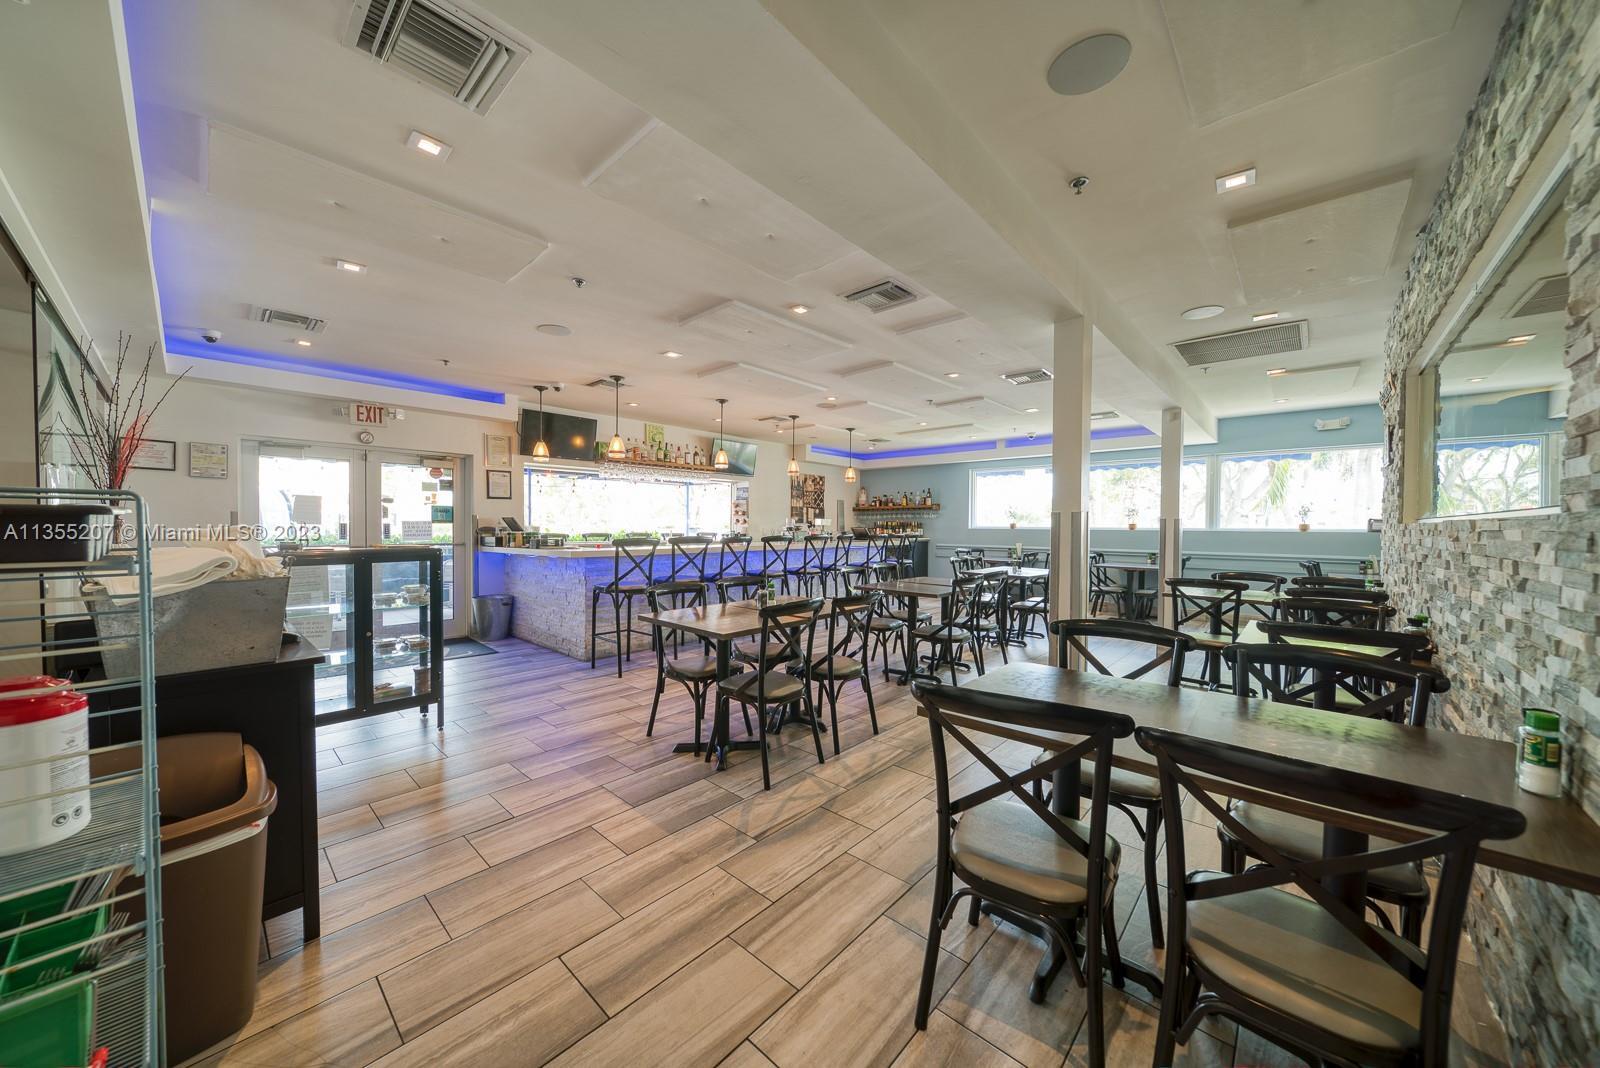 FANTASTIC opportunity to acquire a fully equipped turn-key restaurant. Great Corner location in the 